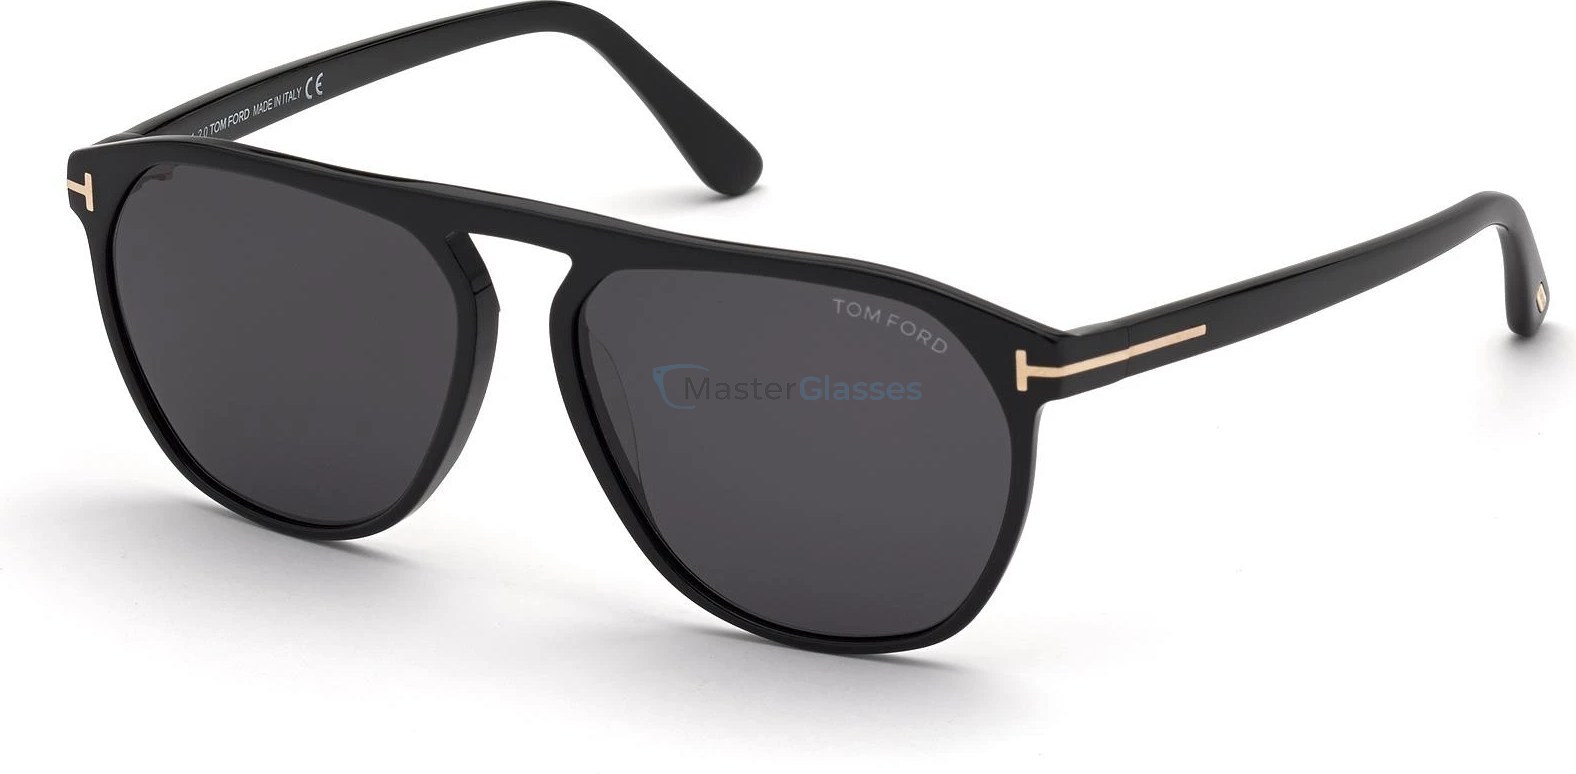   Tom Ford TF 835 01A 58